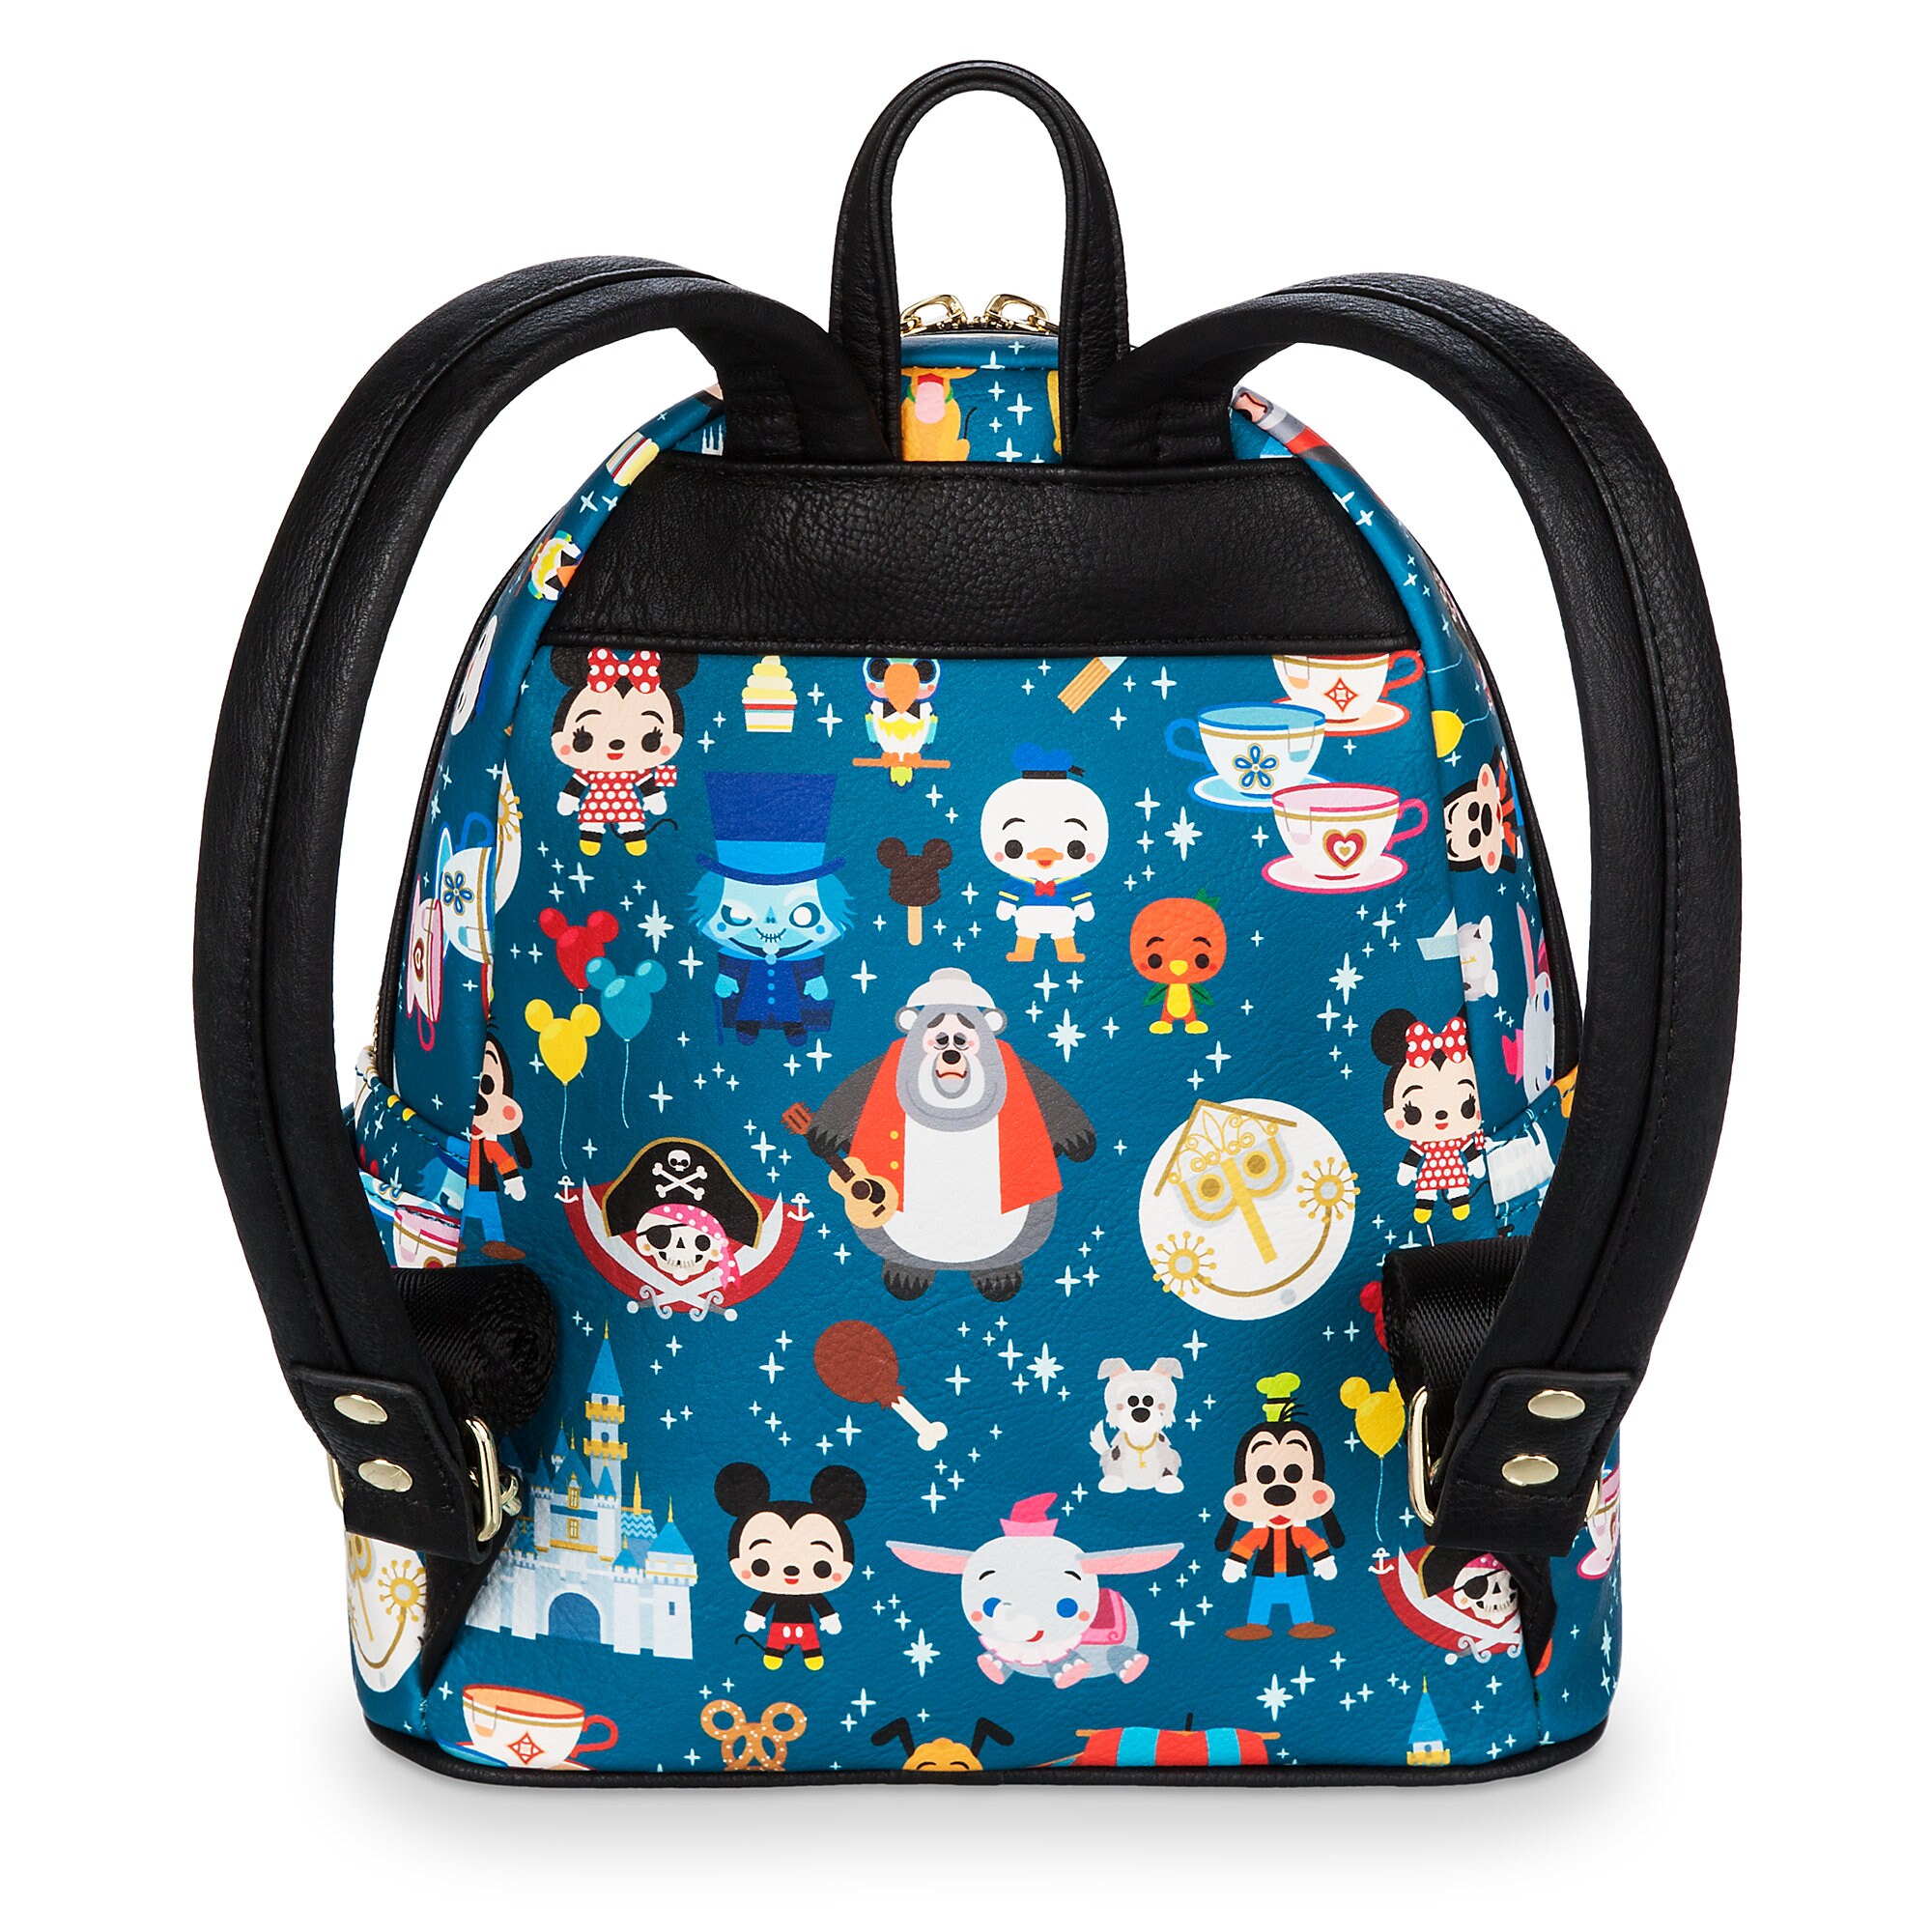 Disney Parks Minis Mini Backpack by Loungefly